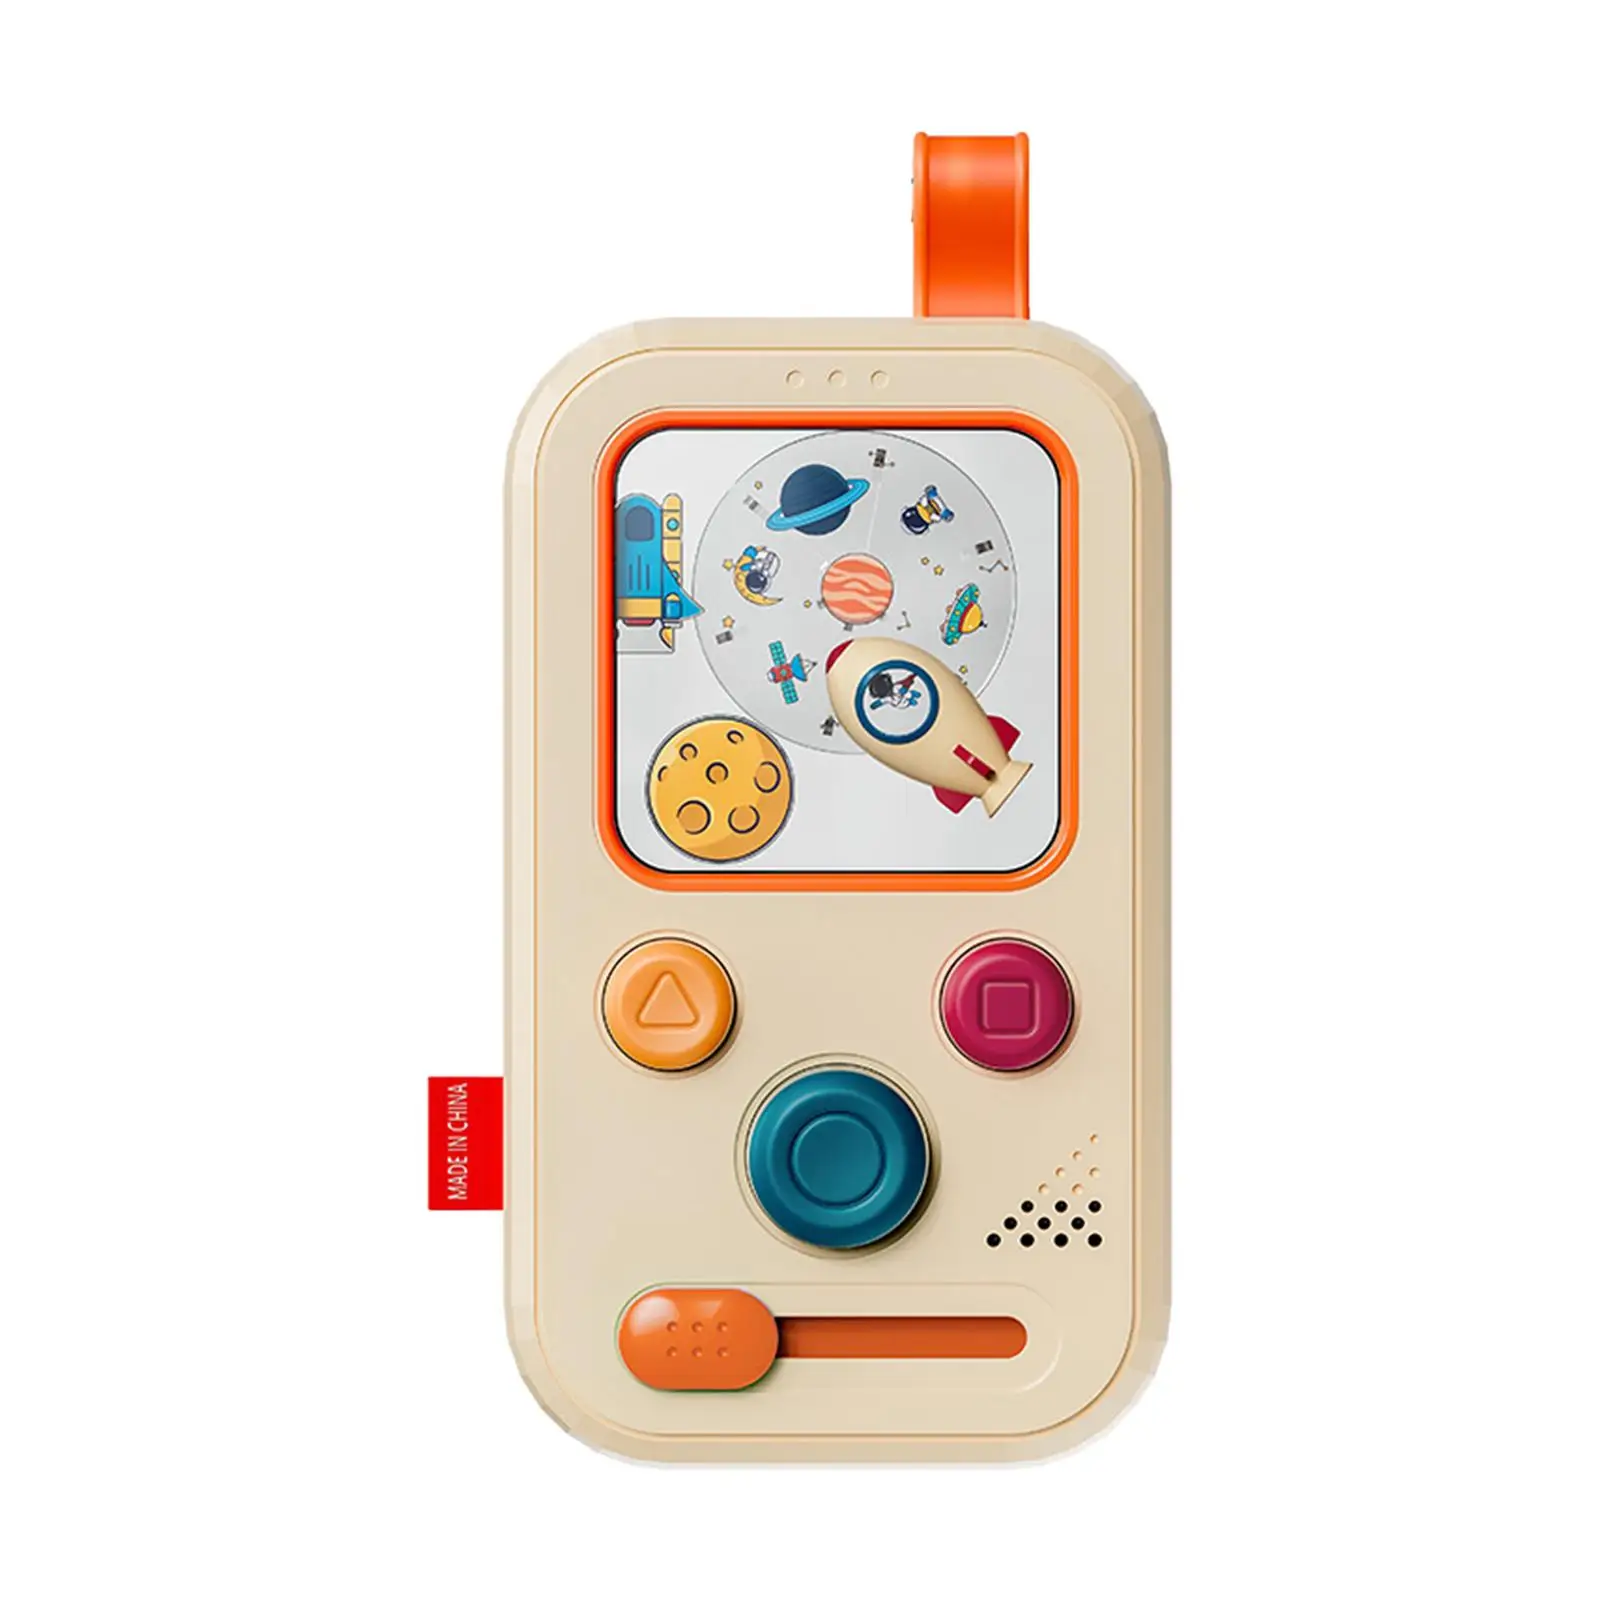 for Kids Pastime Game Compact Relaxating Toy Portable Fun Sensory Toy for Home Party Favor Outing Travel Children